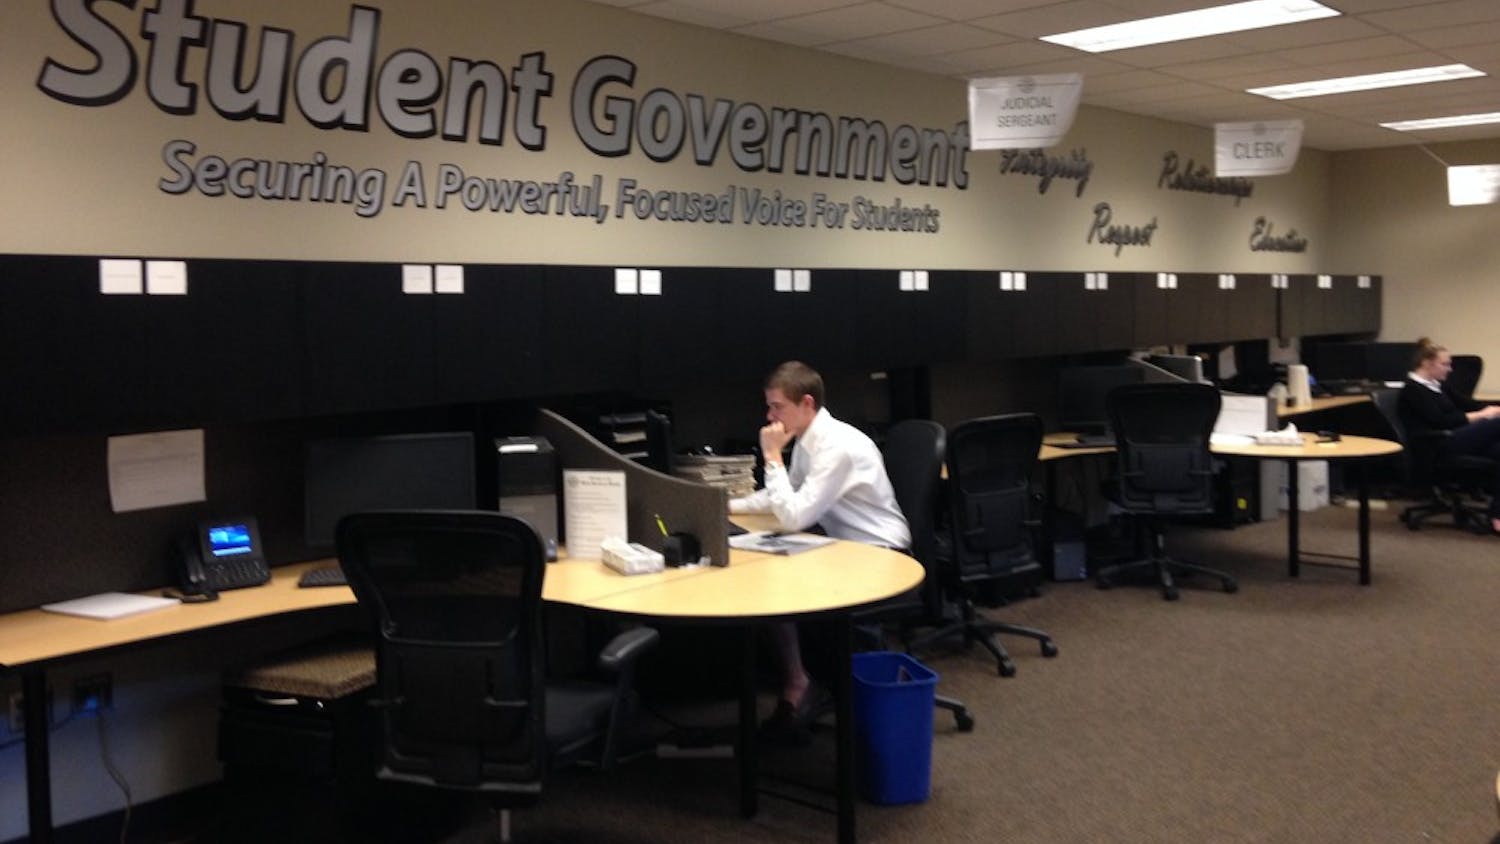 	Student Government continues with business as usual while they wait for a new President and Vice President.